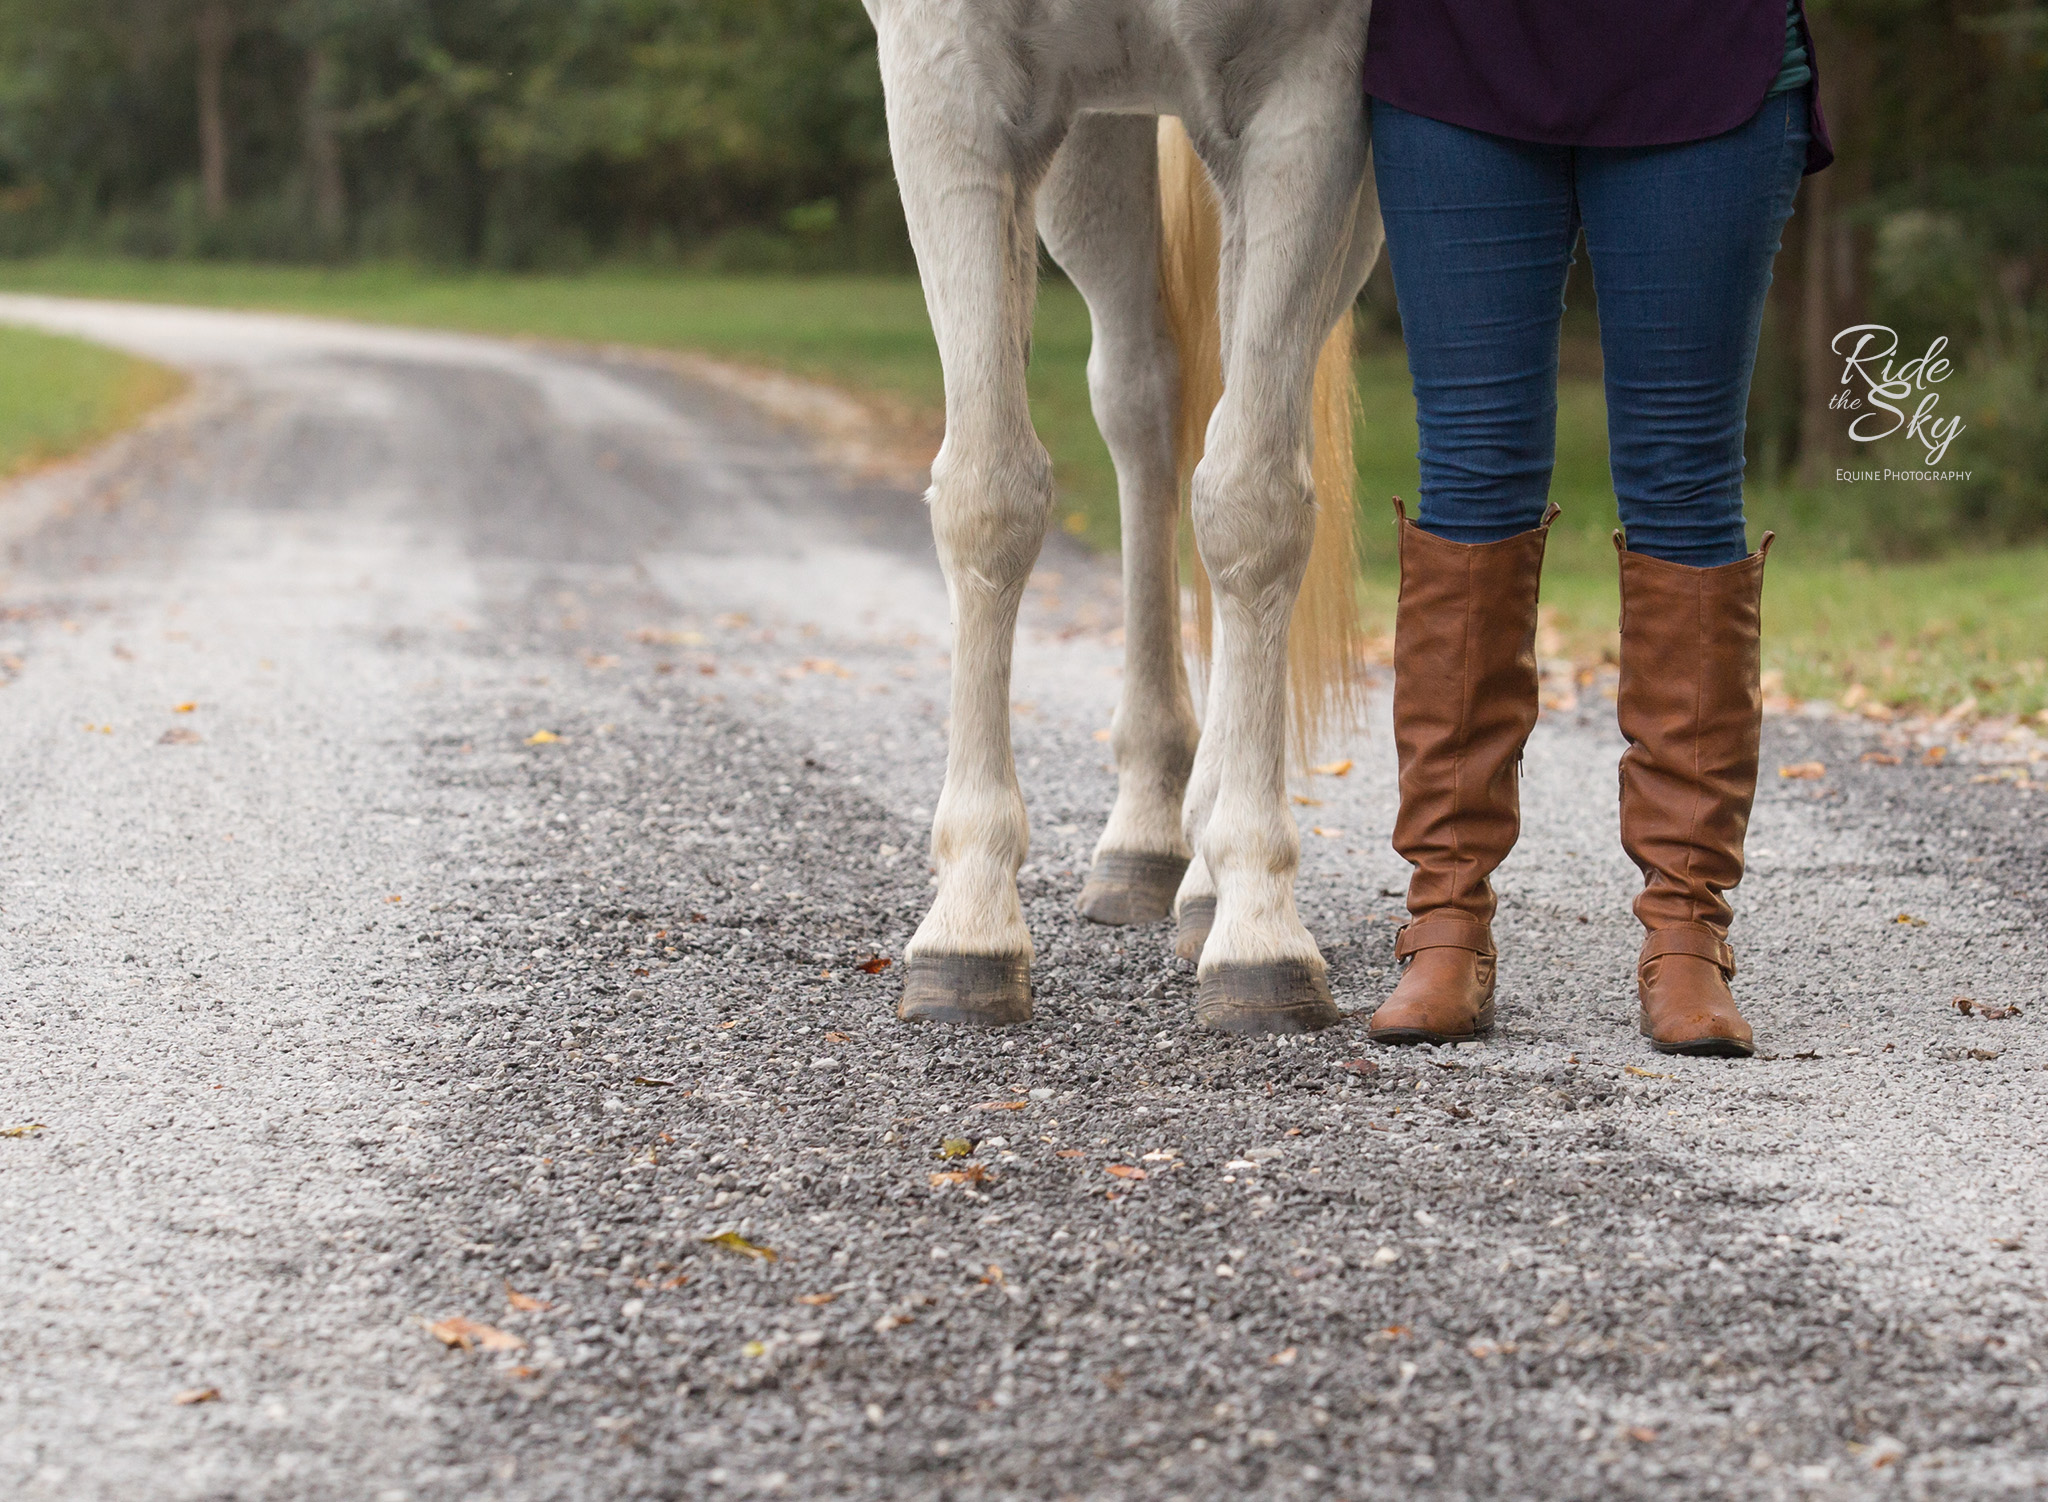 Boots and Horse Hooves on Gravel Road